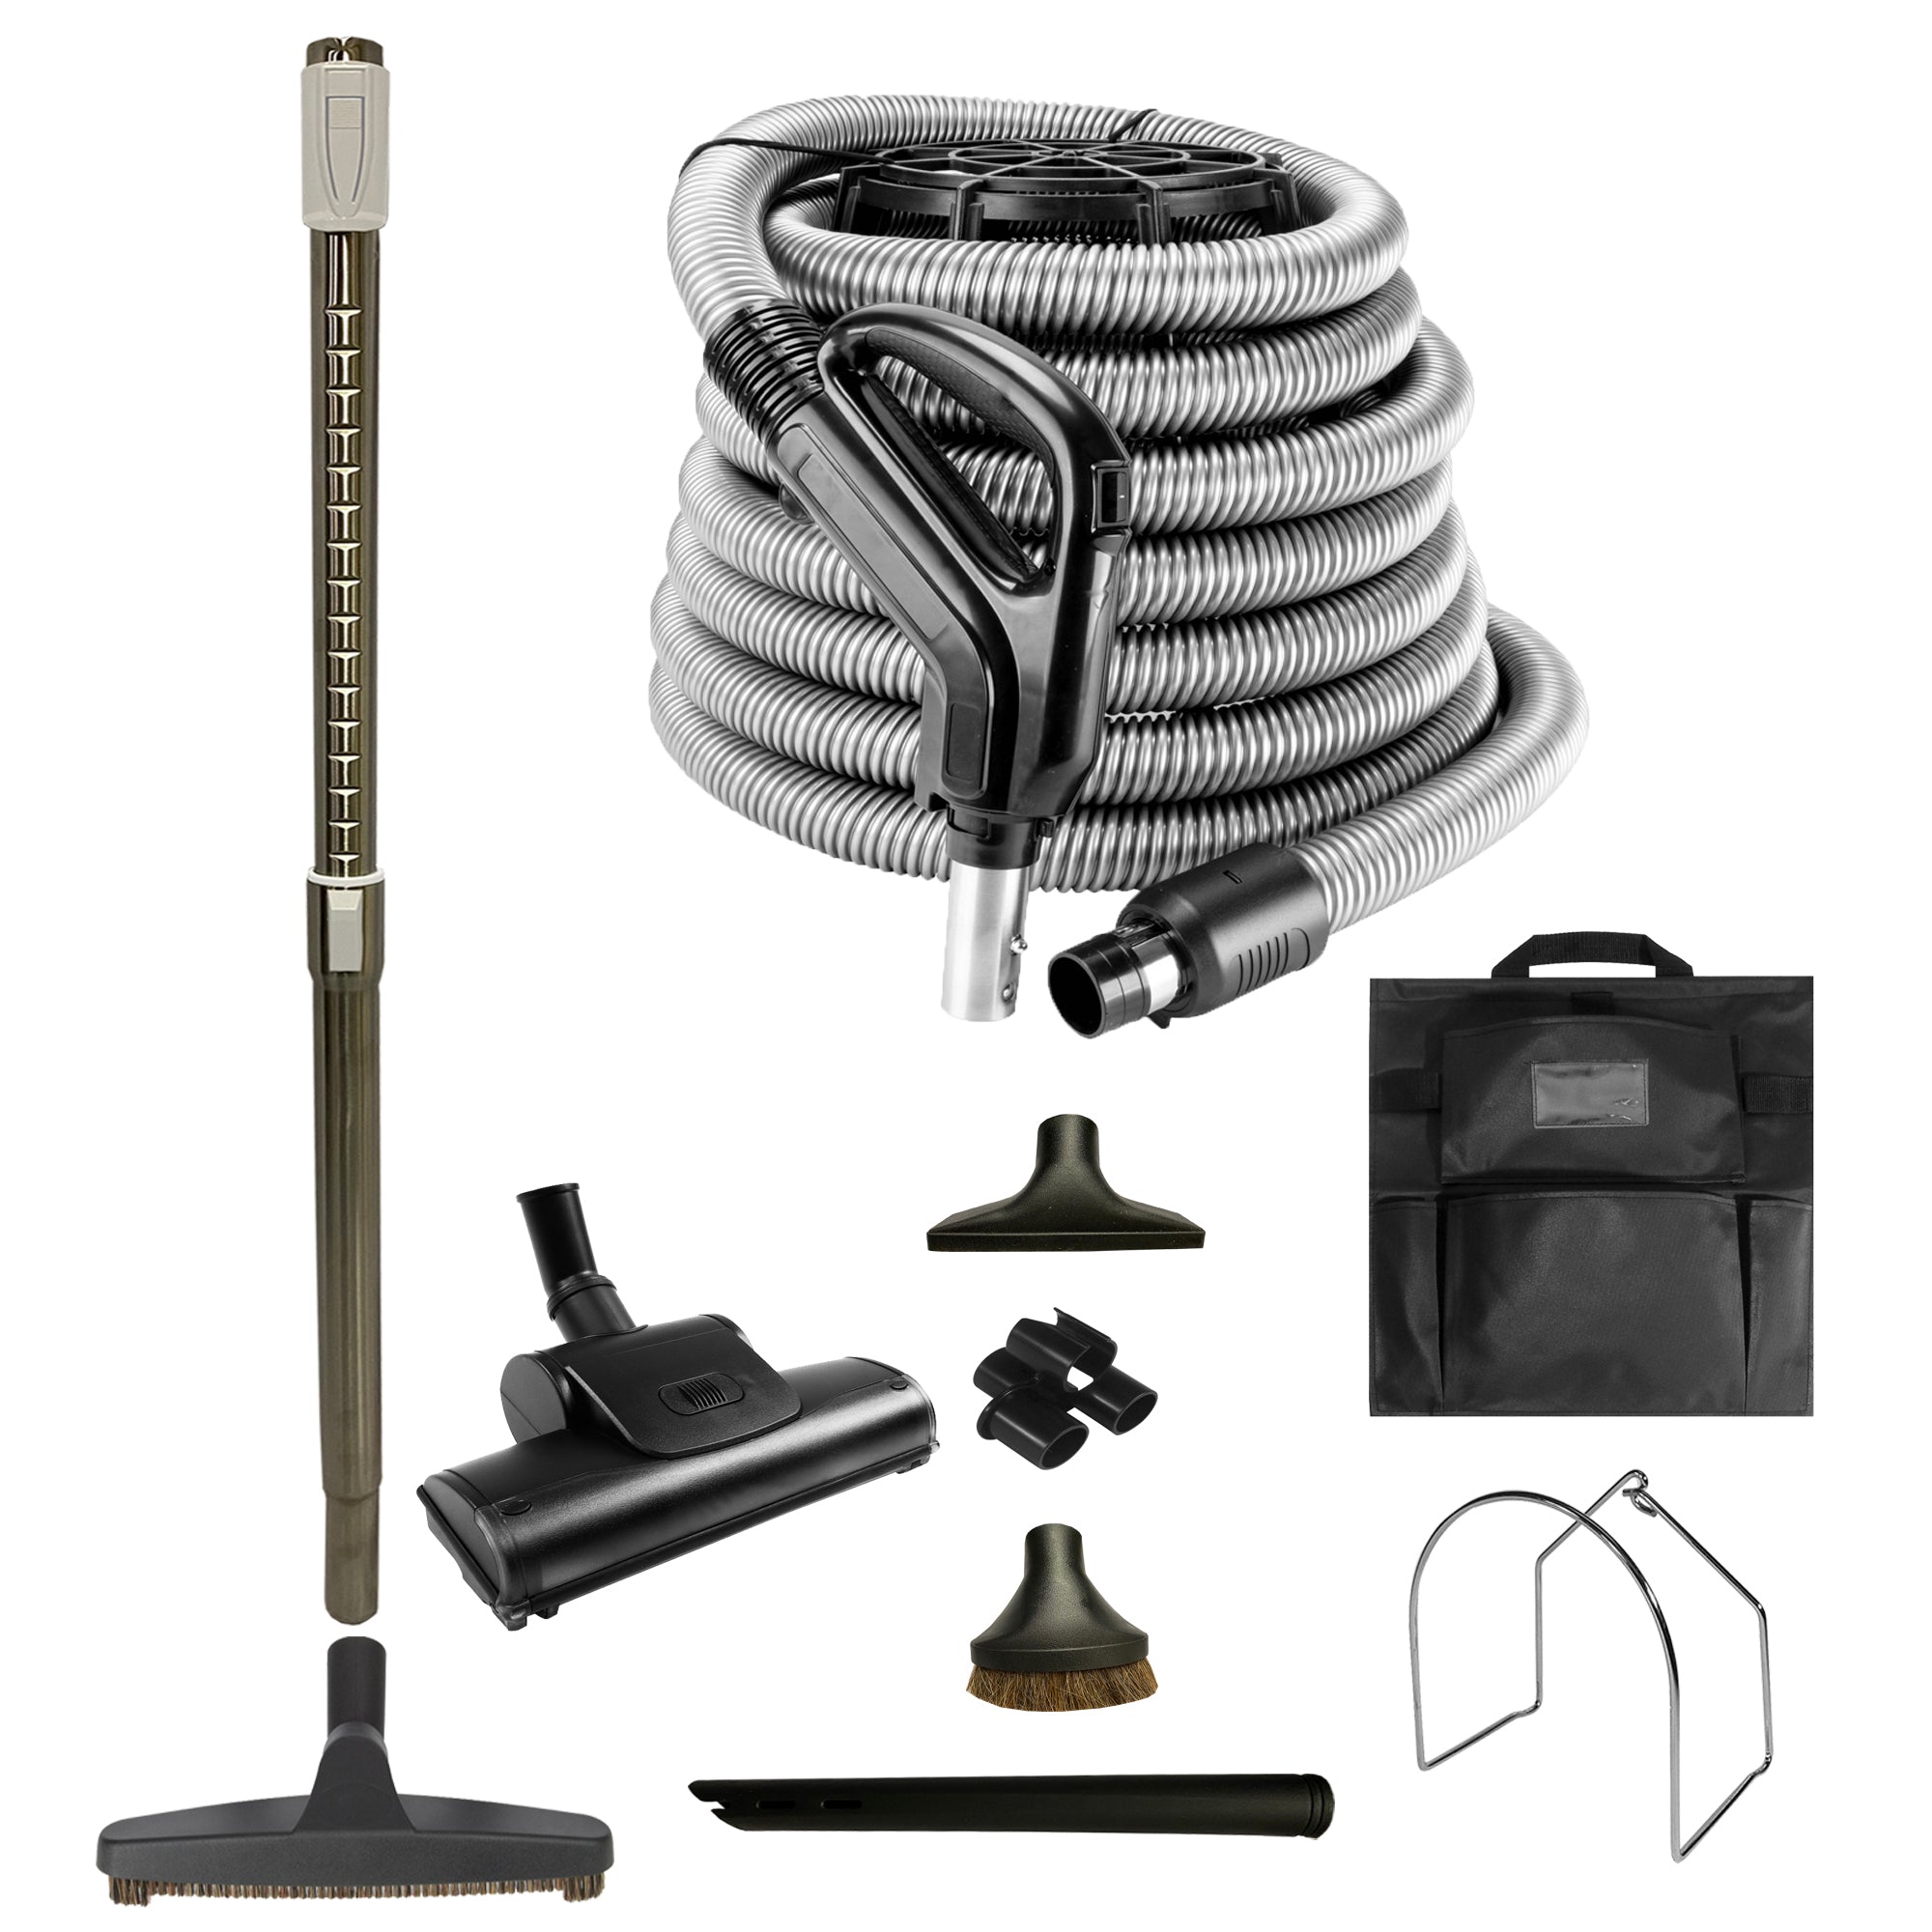 VPC Central Vacuum Accessory Kit - Air Driven - Telescopic Wand with Deluxe Tool Brushes - Black